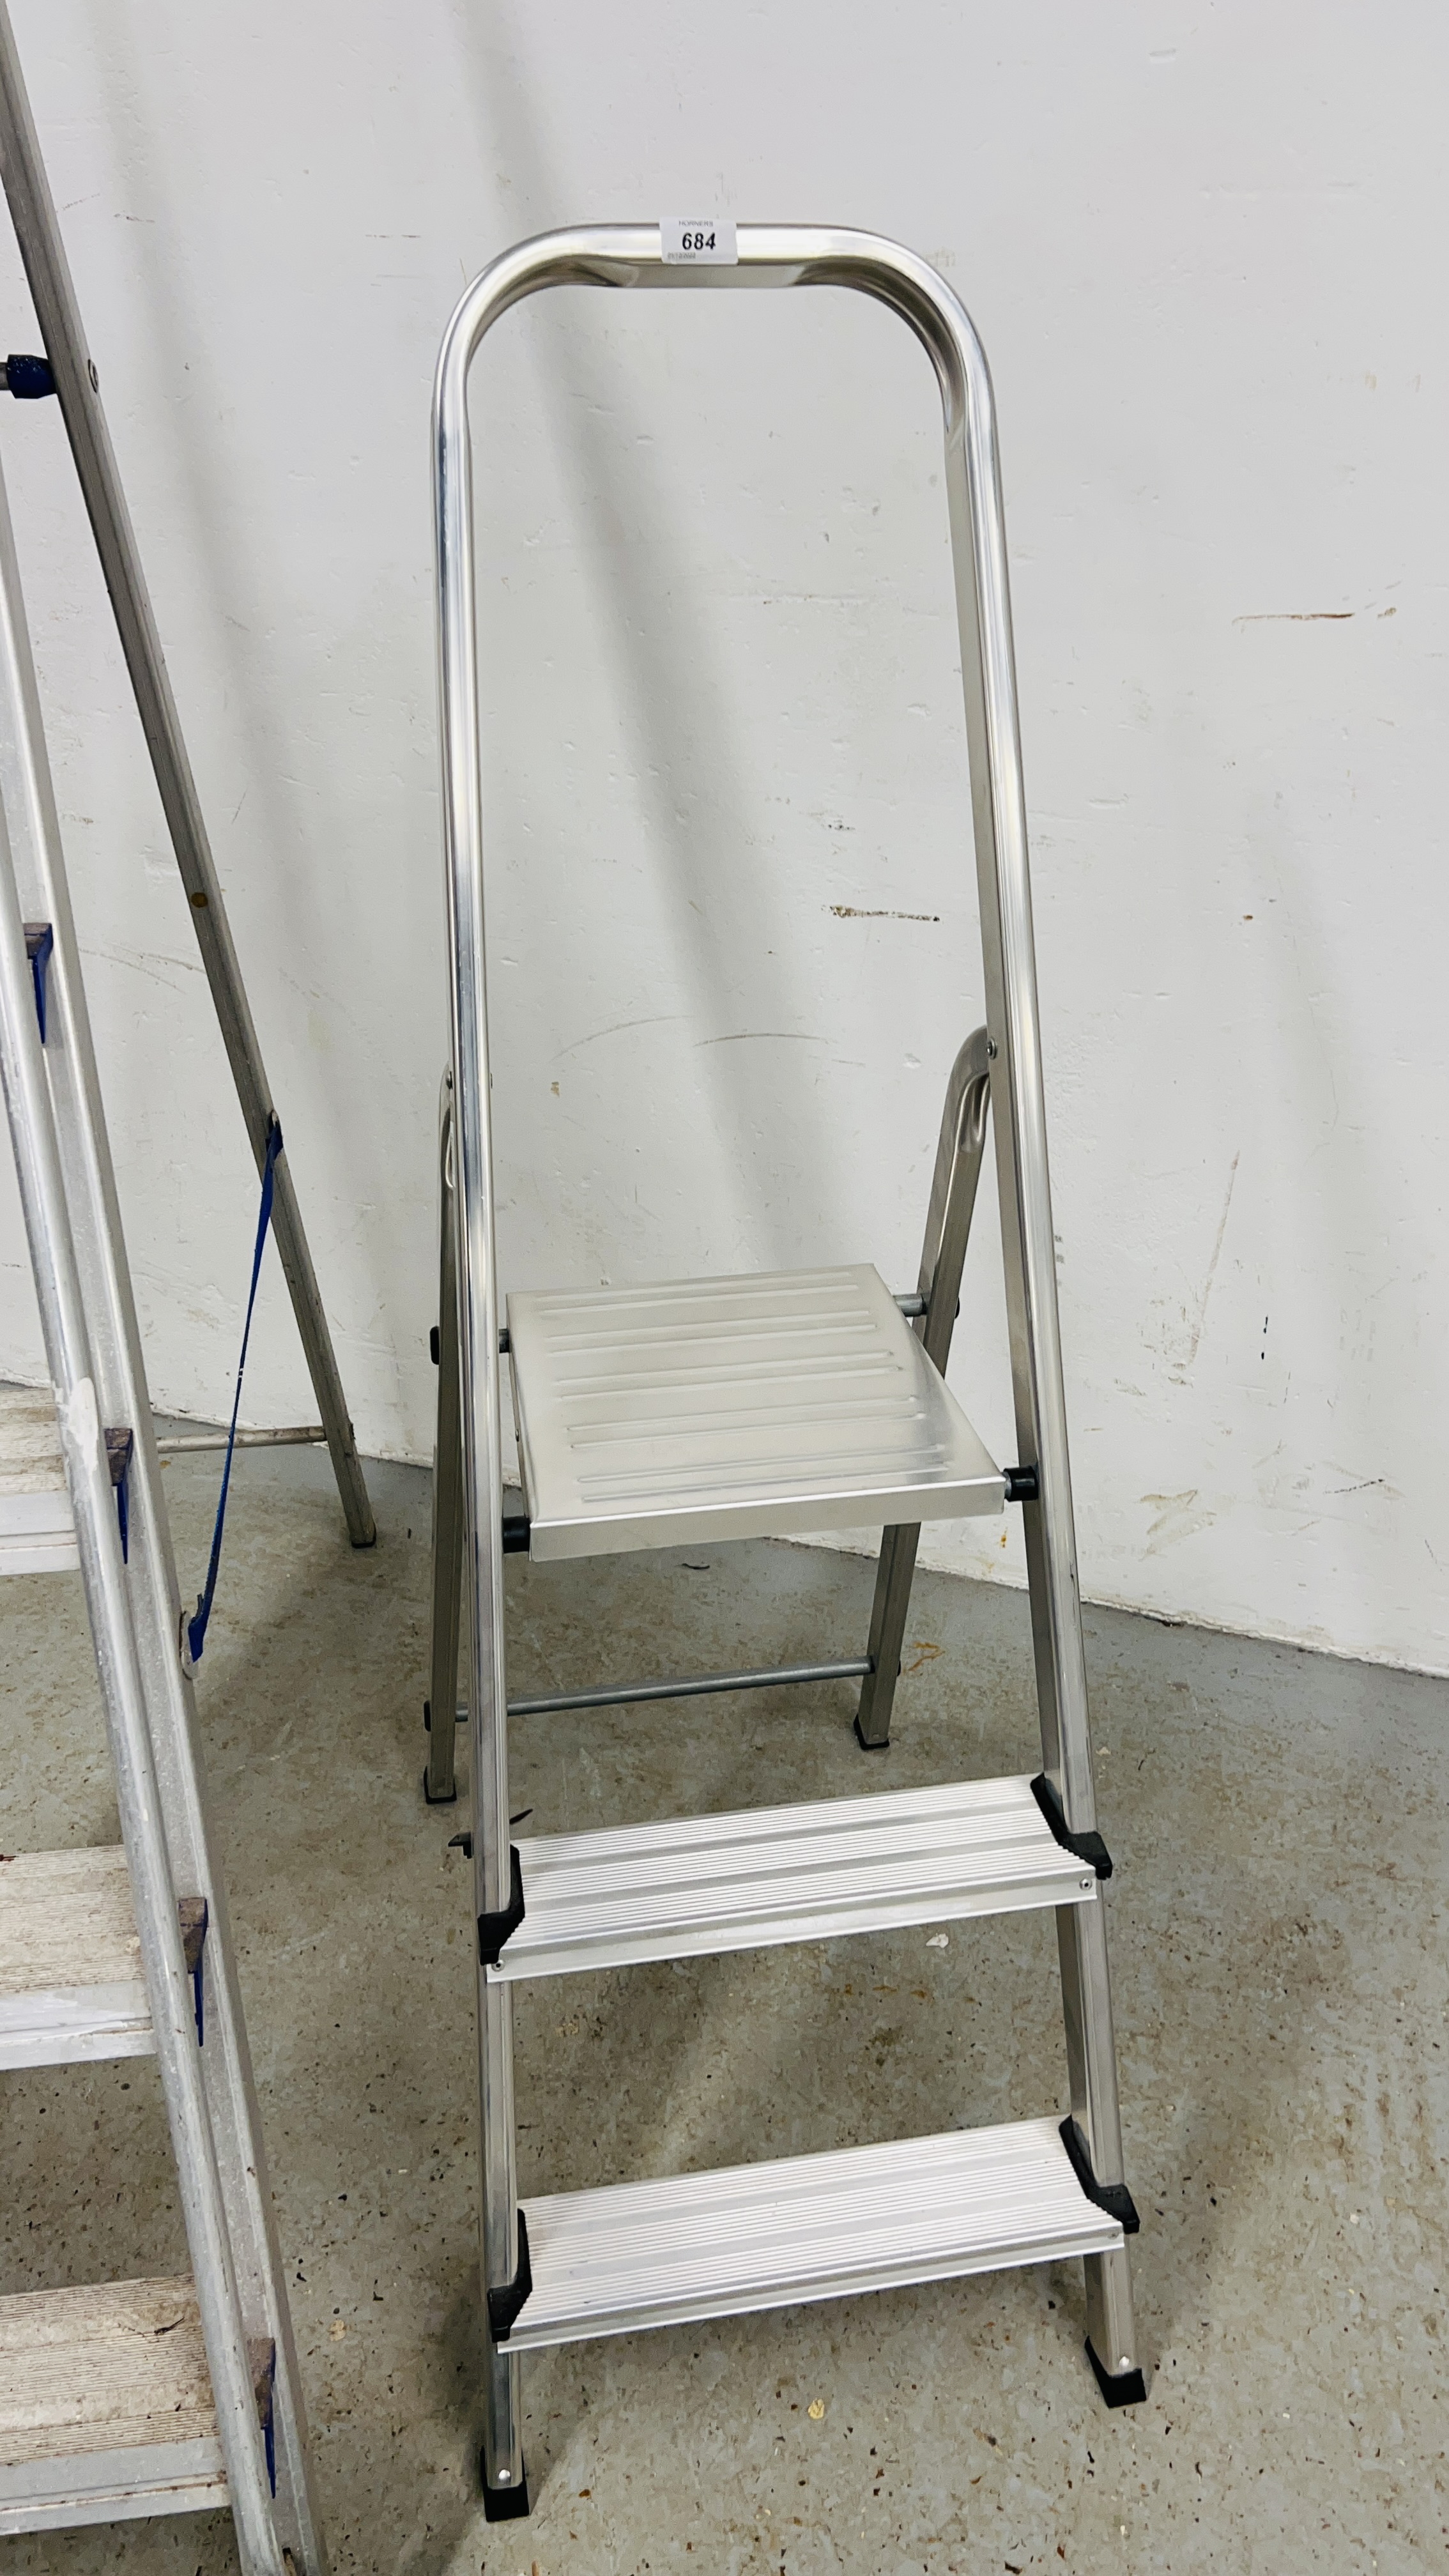 TWO PAIRS OF FOLDING ALUMINIUM STEPS AND FOLDABLE GARDEN KNEELER STOOL - Image 3 of 4